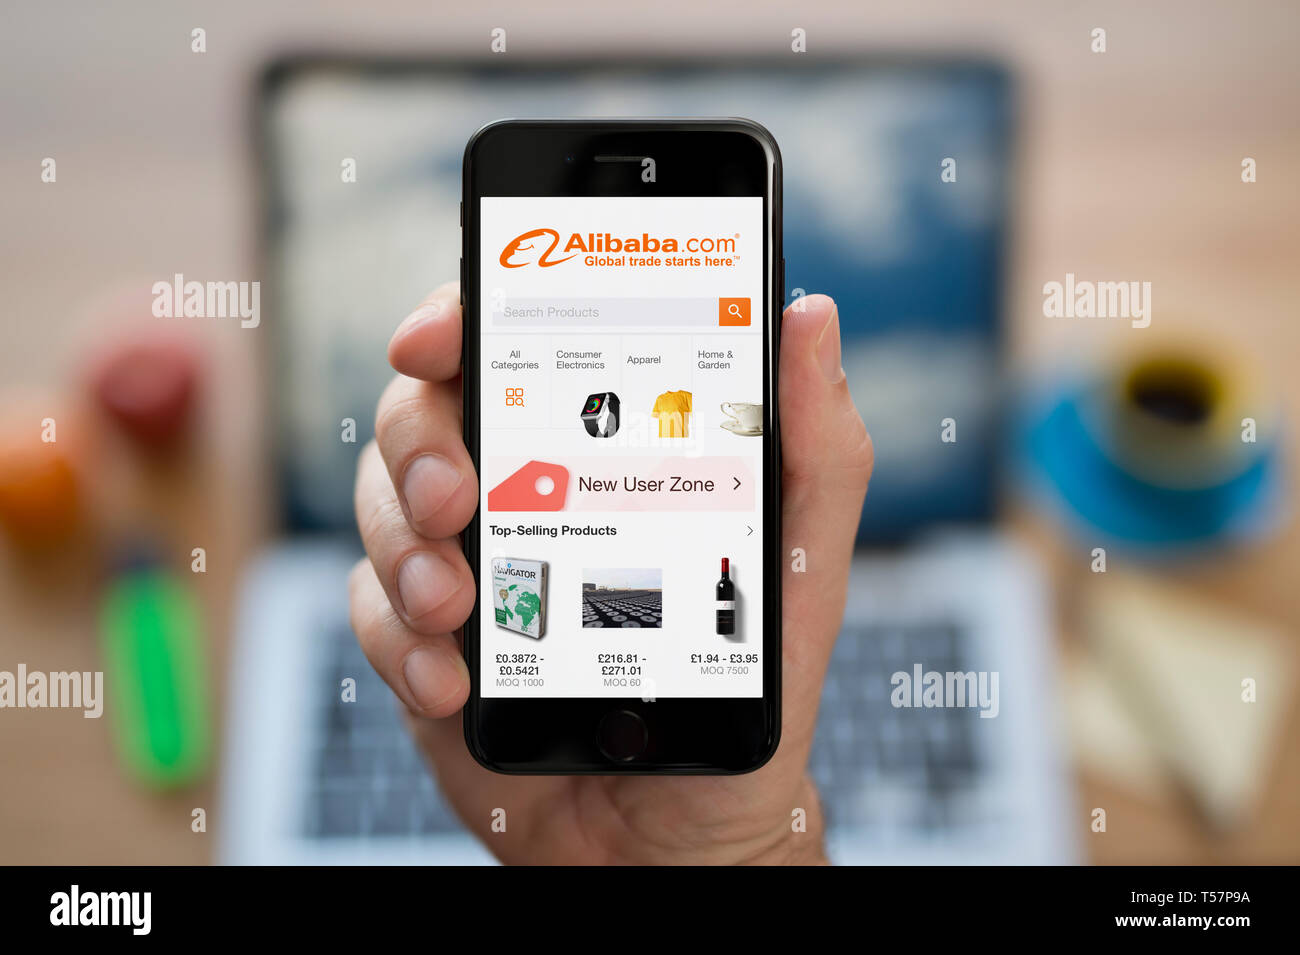 A man looks at his iPhone which displays the Alibaba logo (Editorial use only). Stock Photo